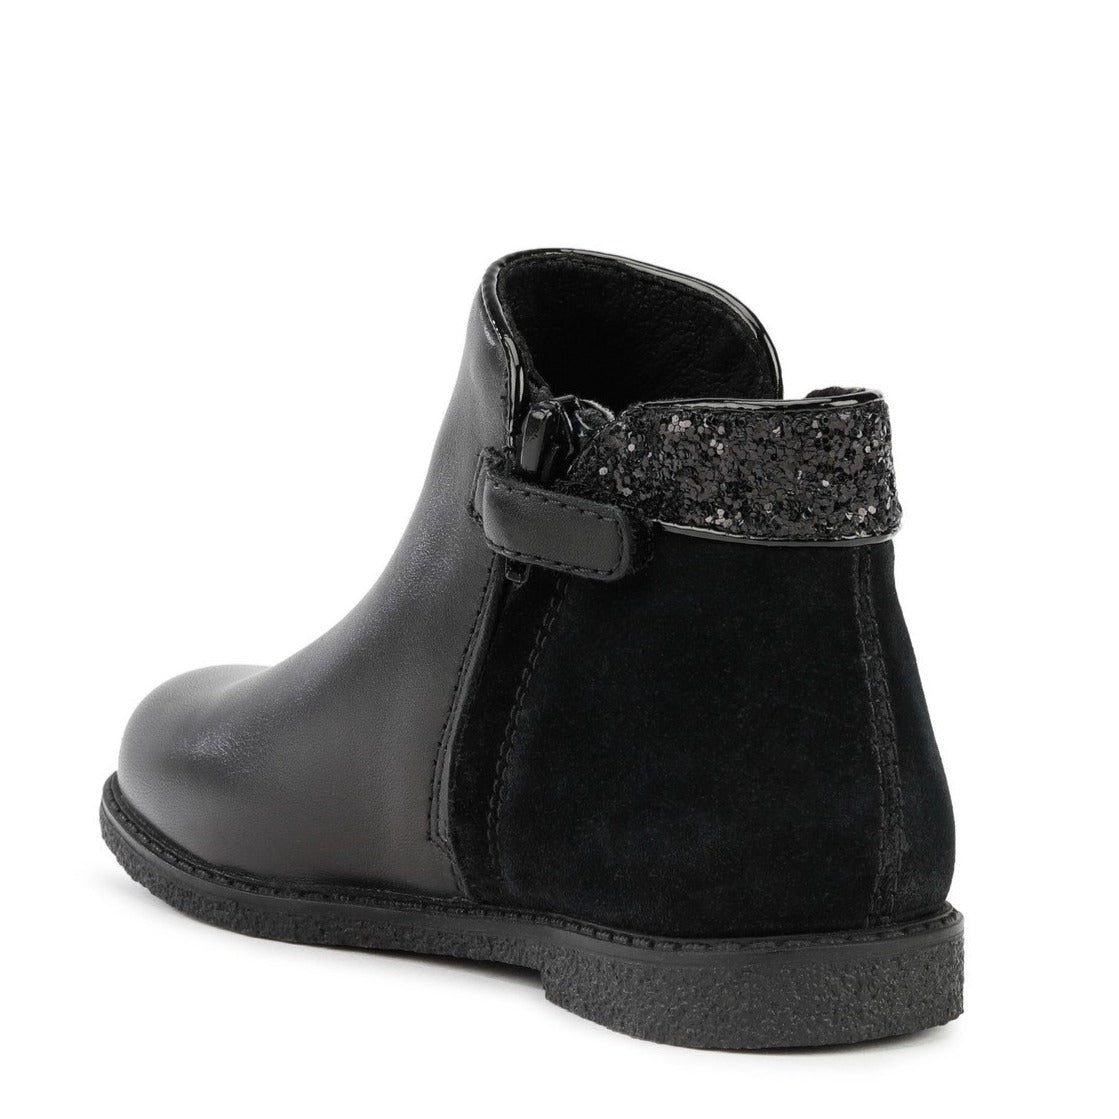 Shawntel Girl's Zipped Ankle Boot in Black Leather with Suede Heel